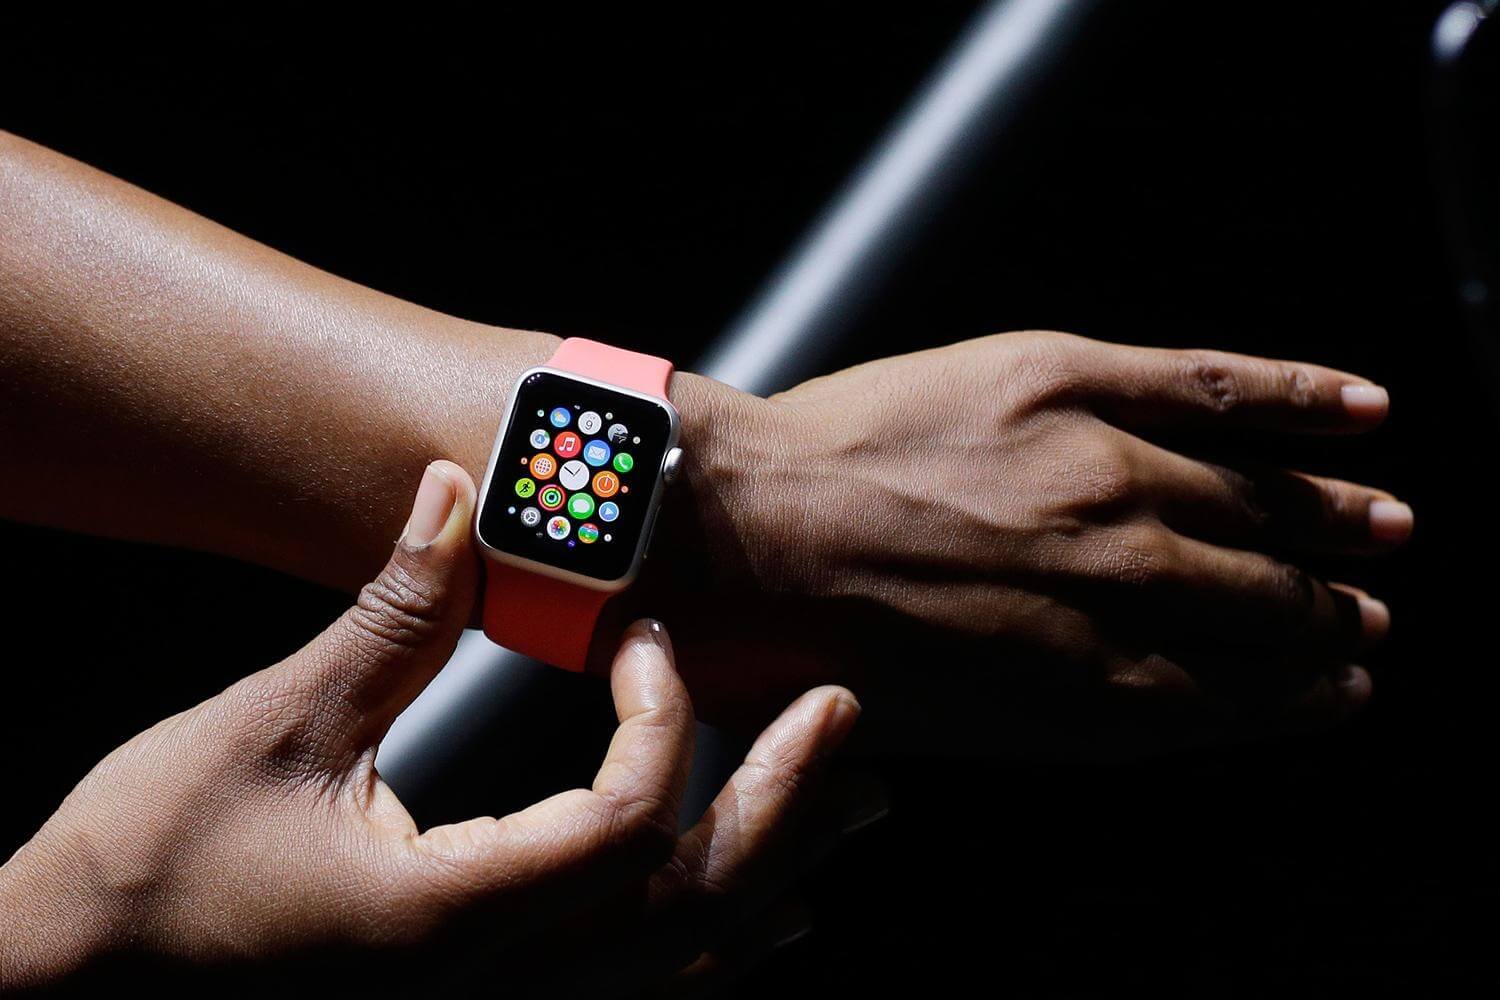 Apple Watch: User Experience and Development Opportunities